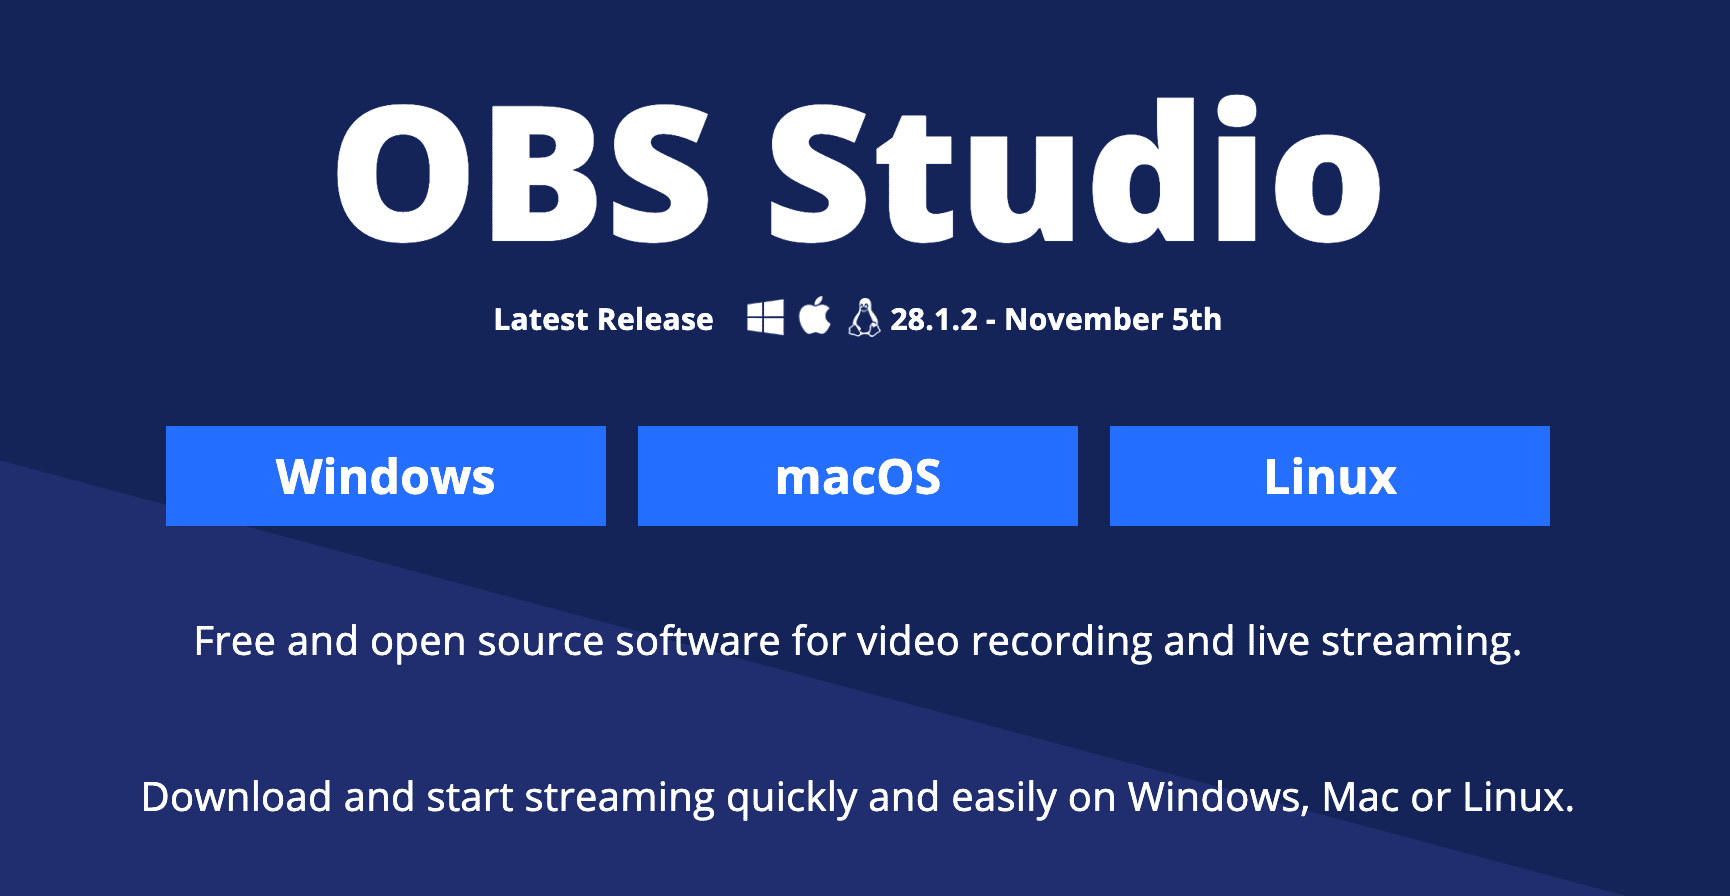 OBS Studio is a free and open source video recording and live streaming software.